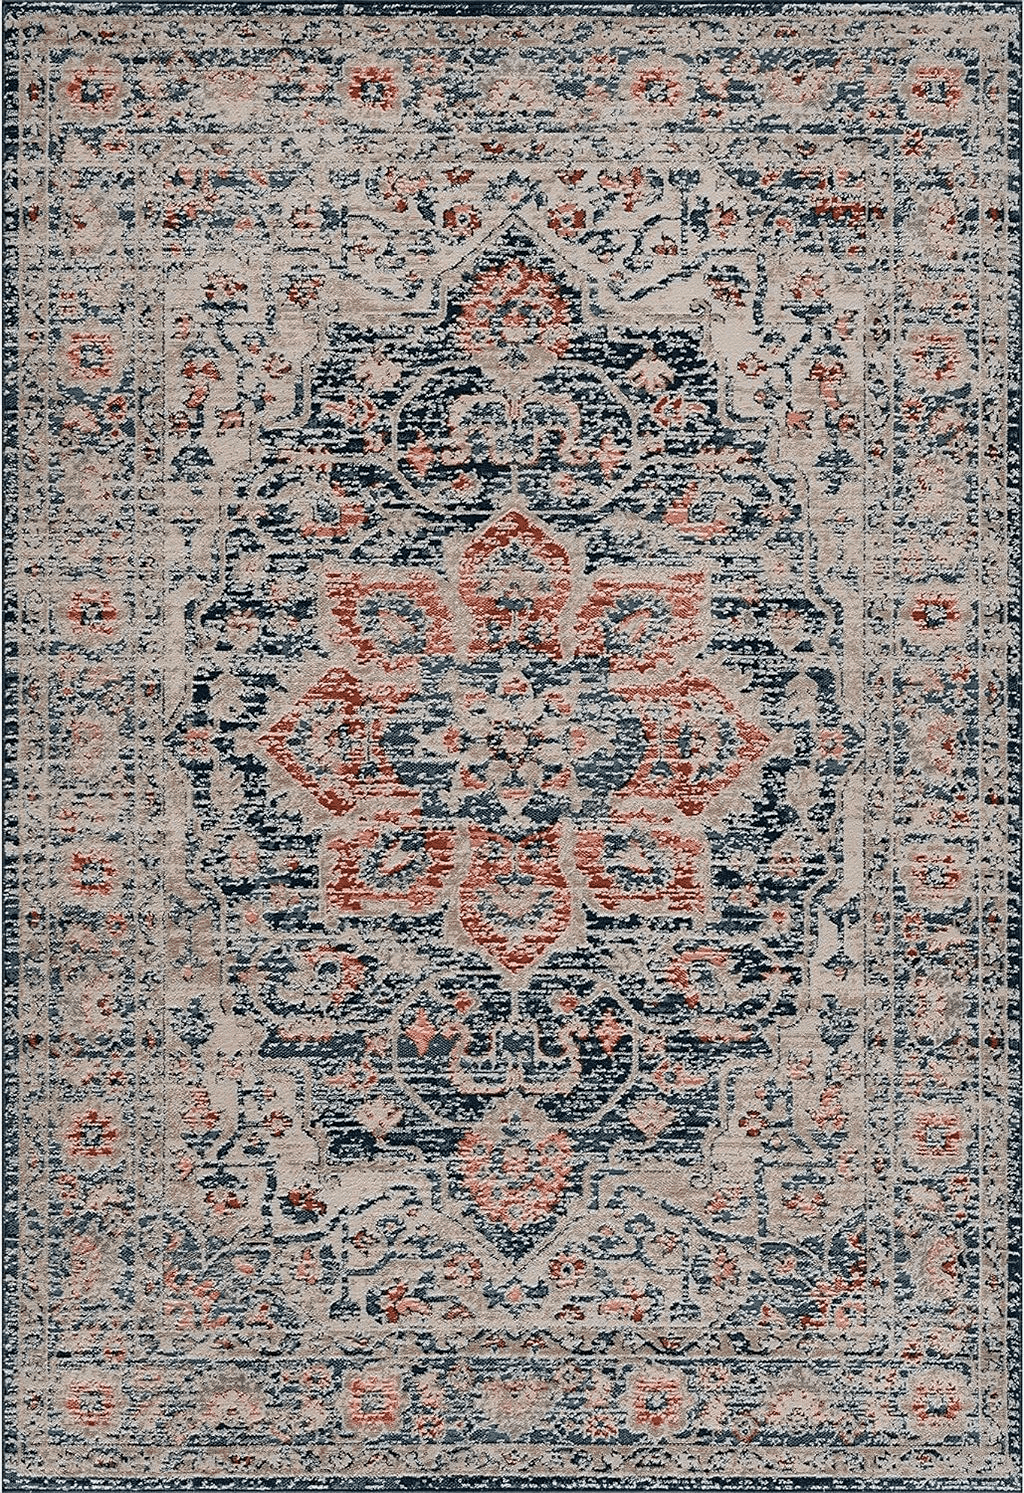 Caria Bloom Rugs Traditional Blue Multicolor Area Rug - Vintage Boho 5x7 Rug for Living Room, Bedroom and Kitchen (5'3" x 7'6")